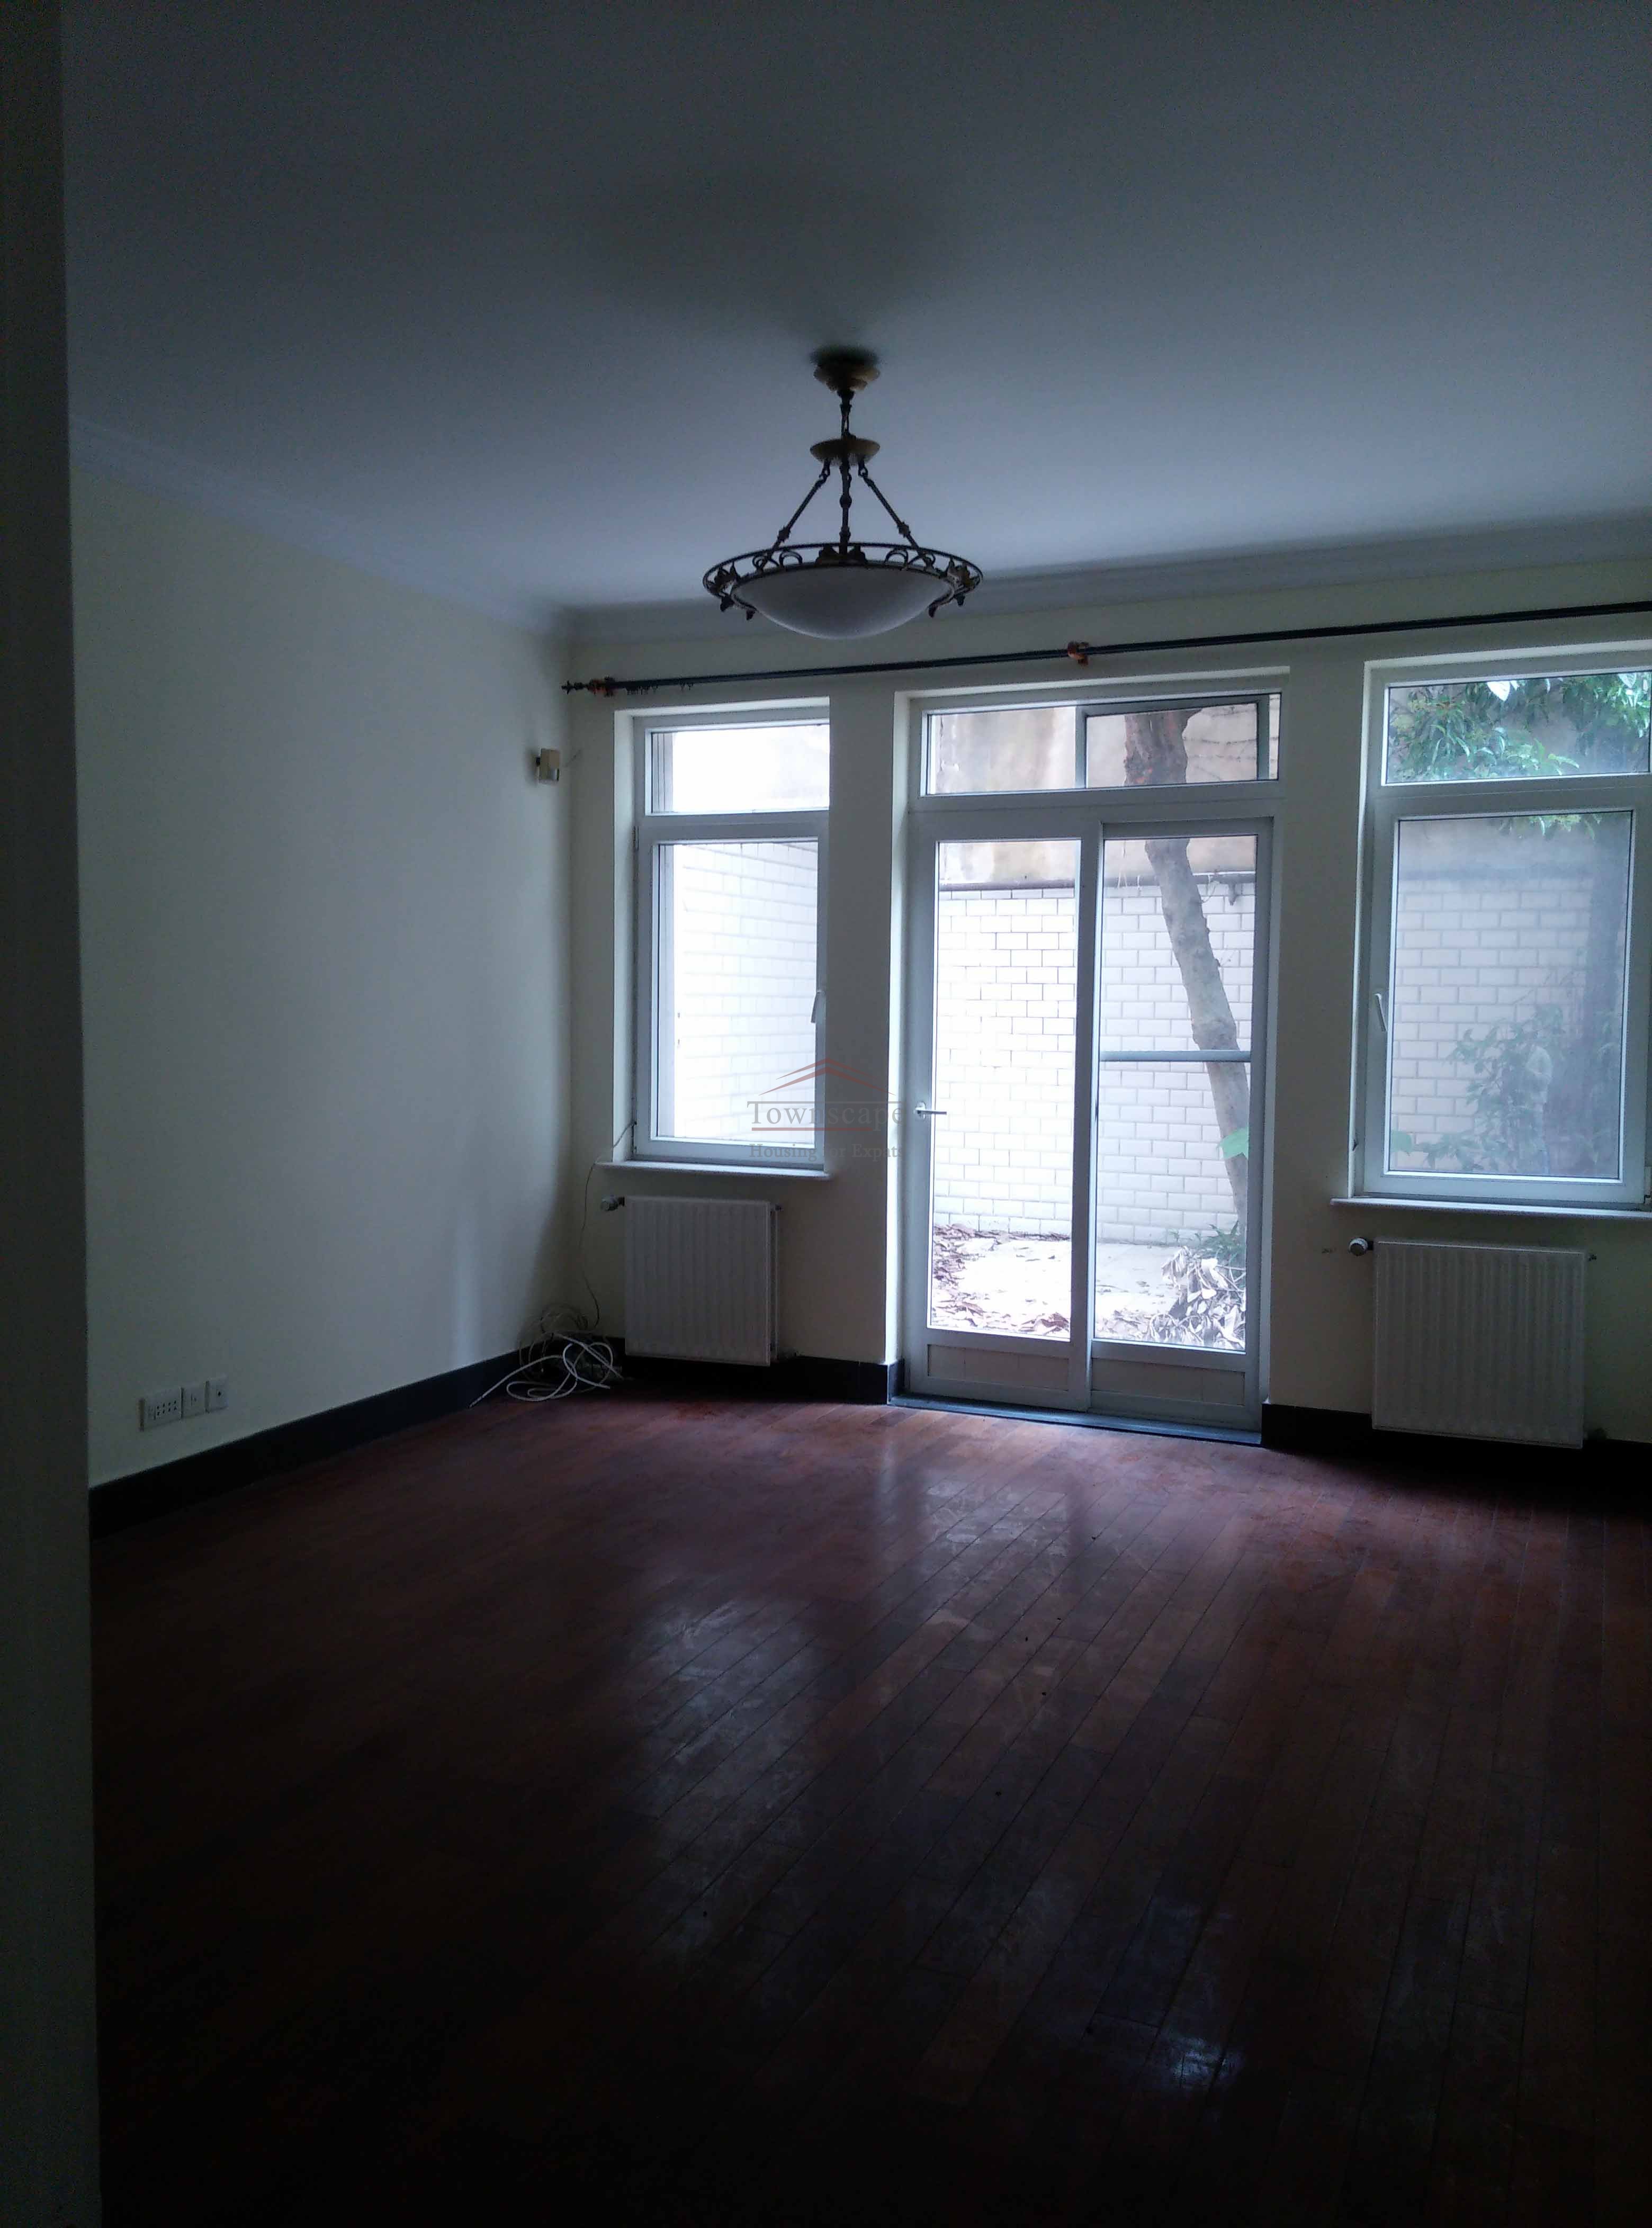  3 Bedroom Lane House for rent in Shanghai w/wall heating